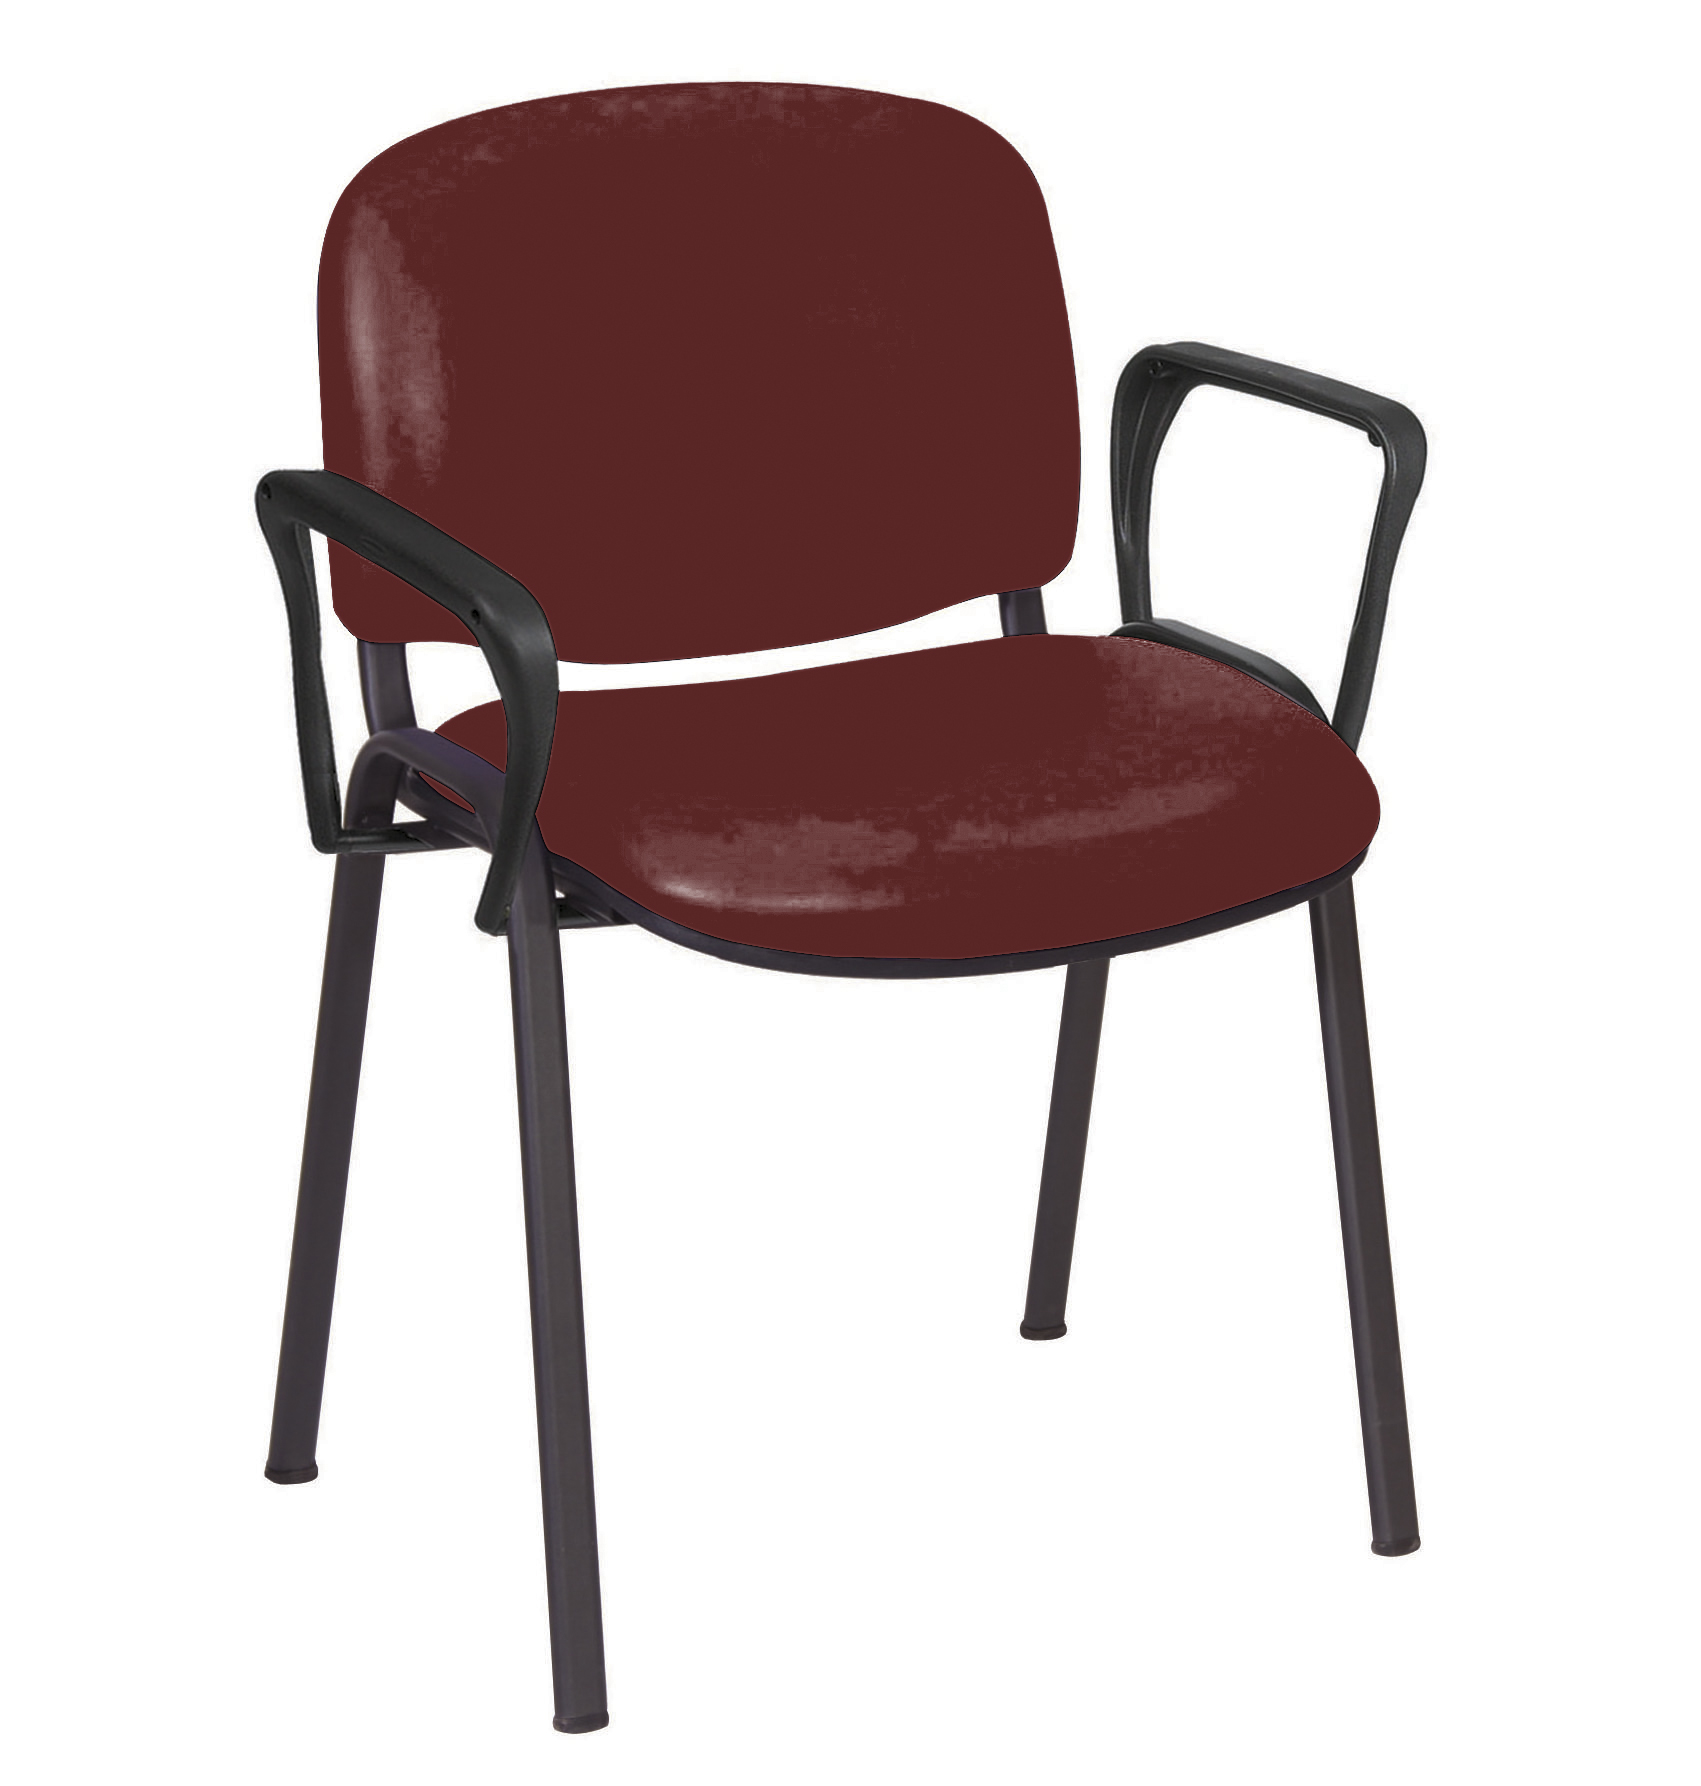 Sunflower Galaxy Visitors Chair Vinyl With Arms | Medical Supermarket